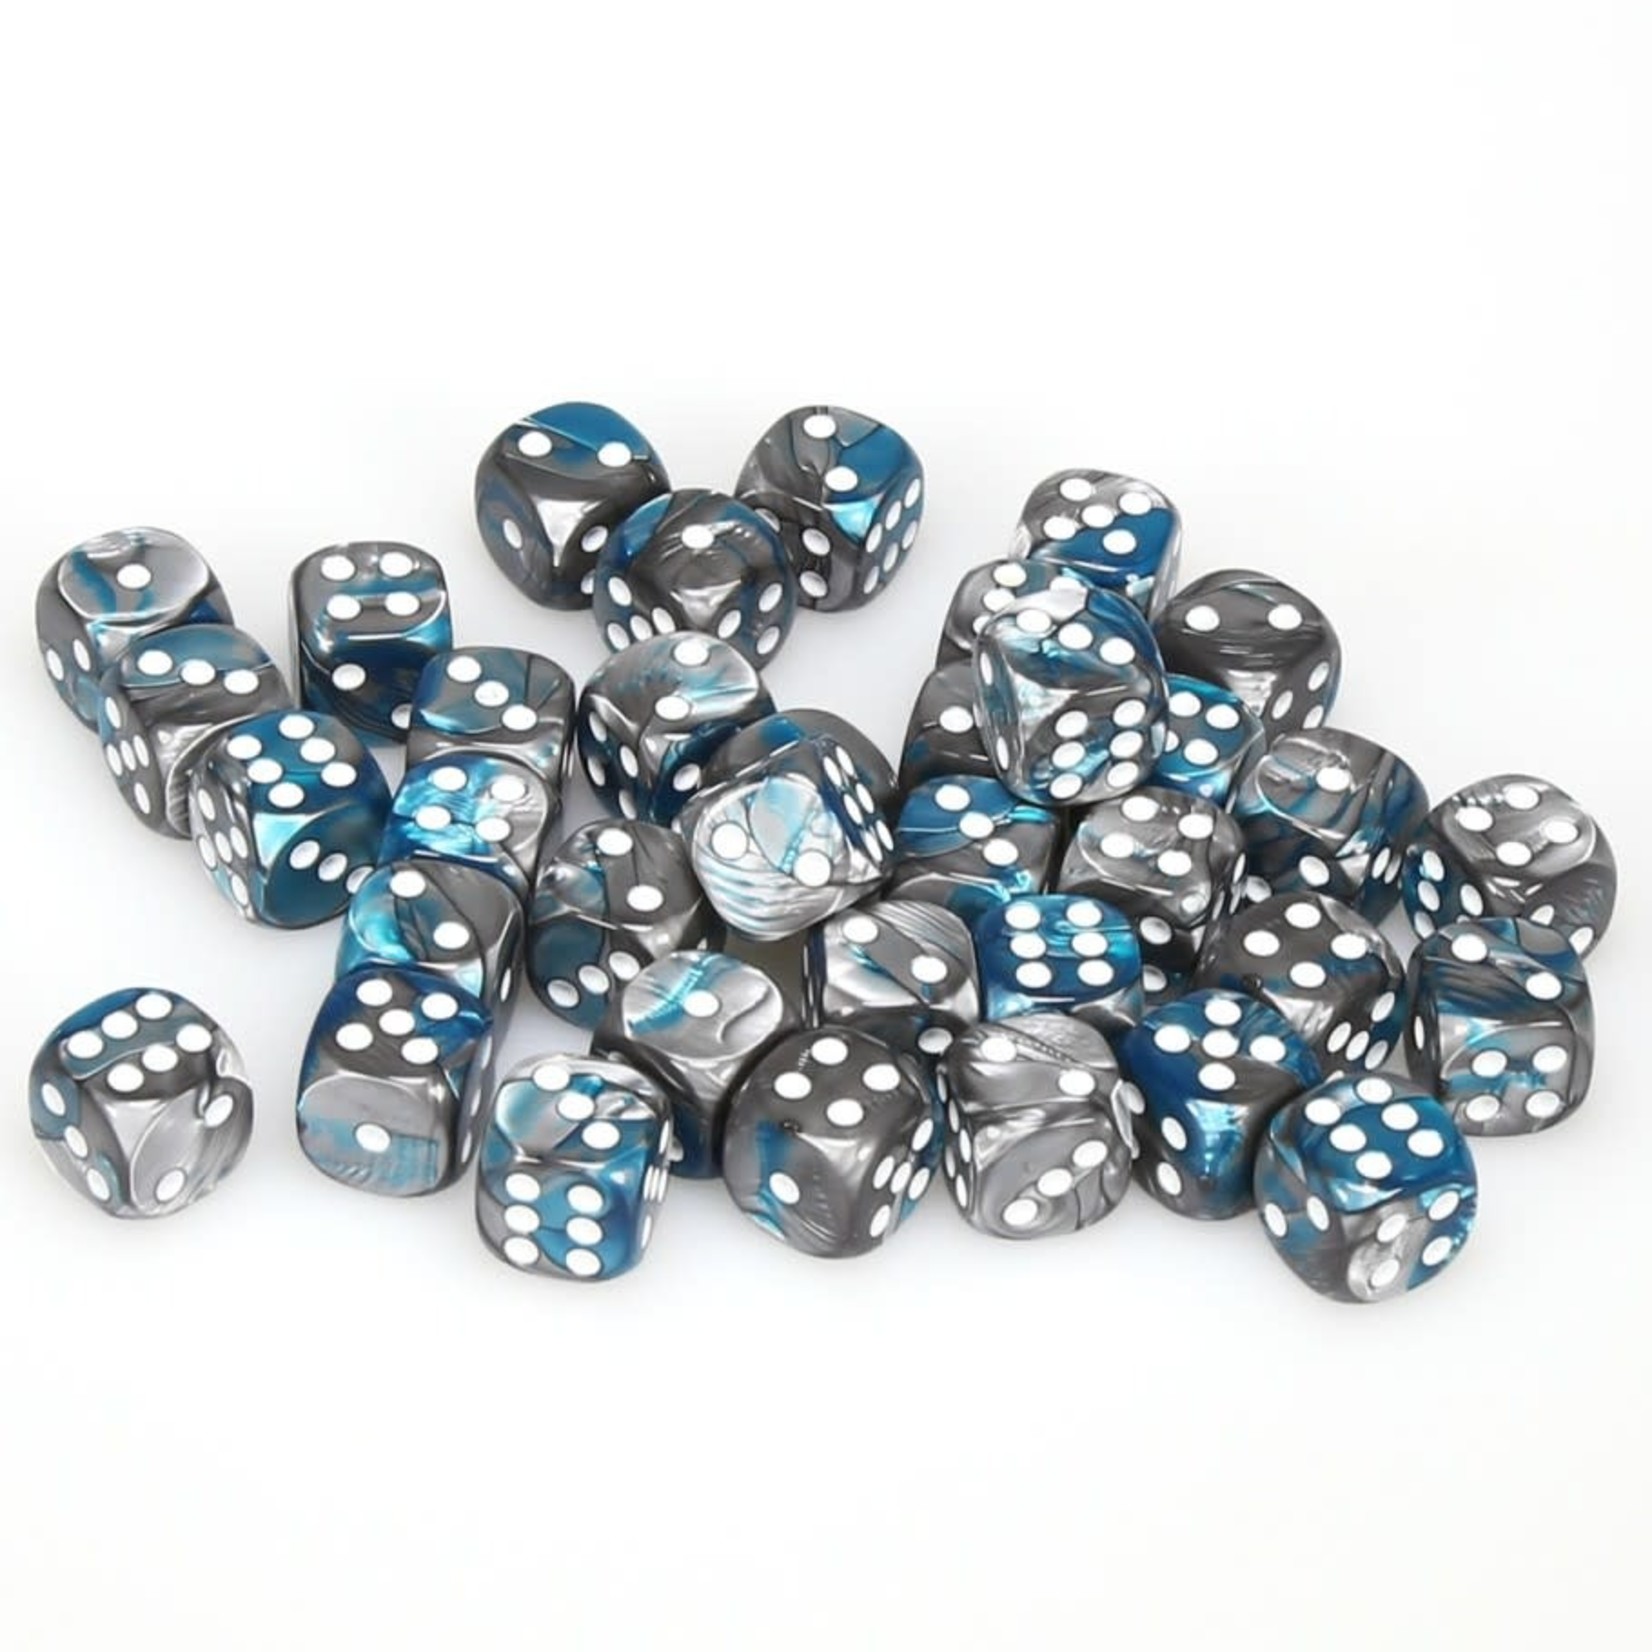 Chessex Chessex Gemini Steel / Teal with White 12 mm d6 36 die set